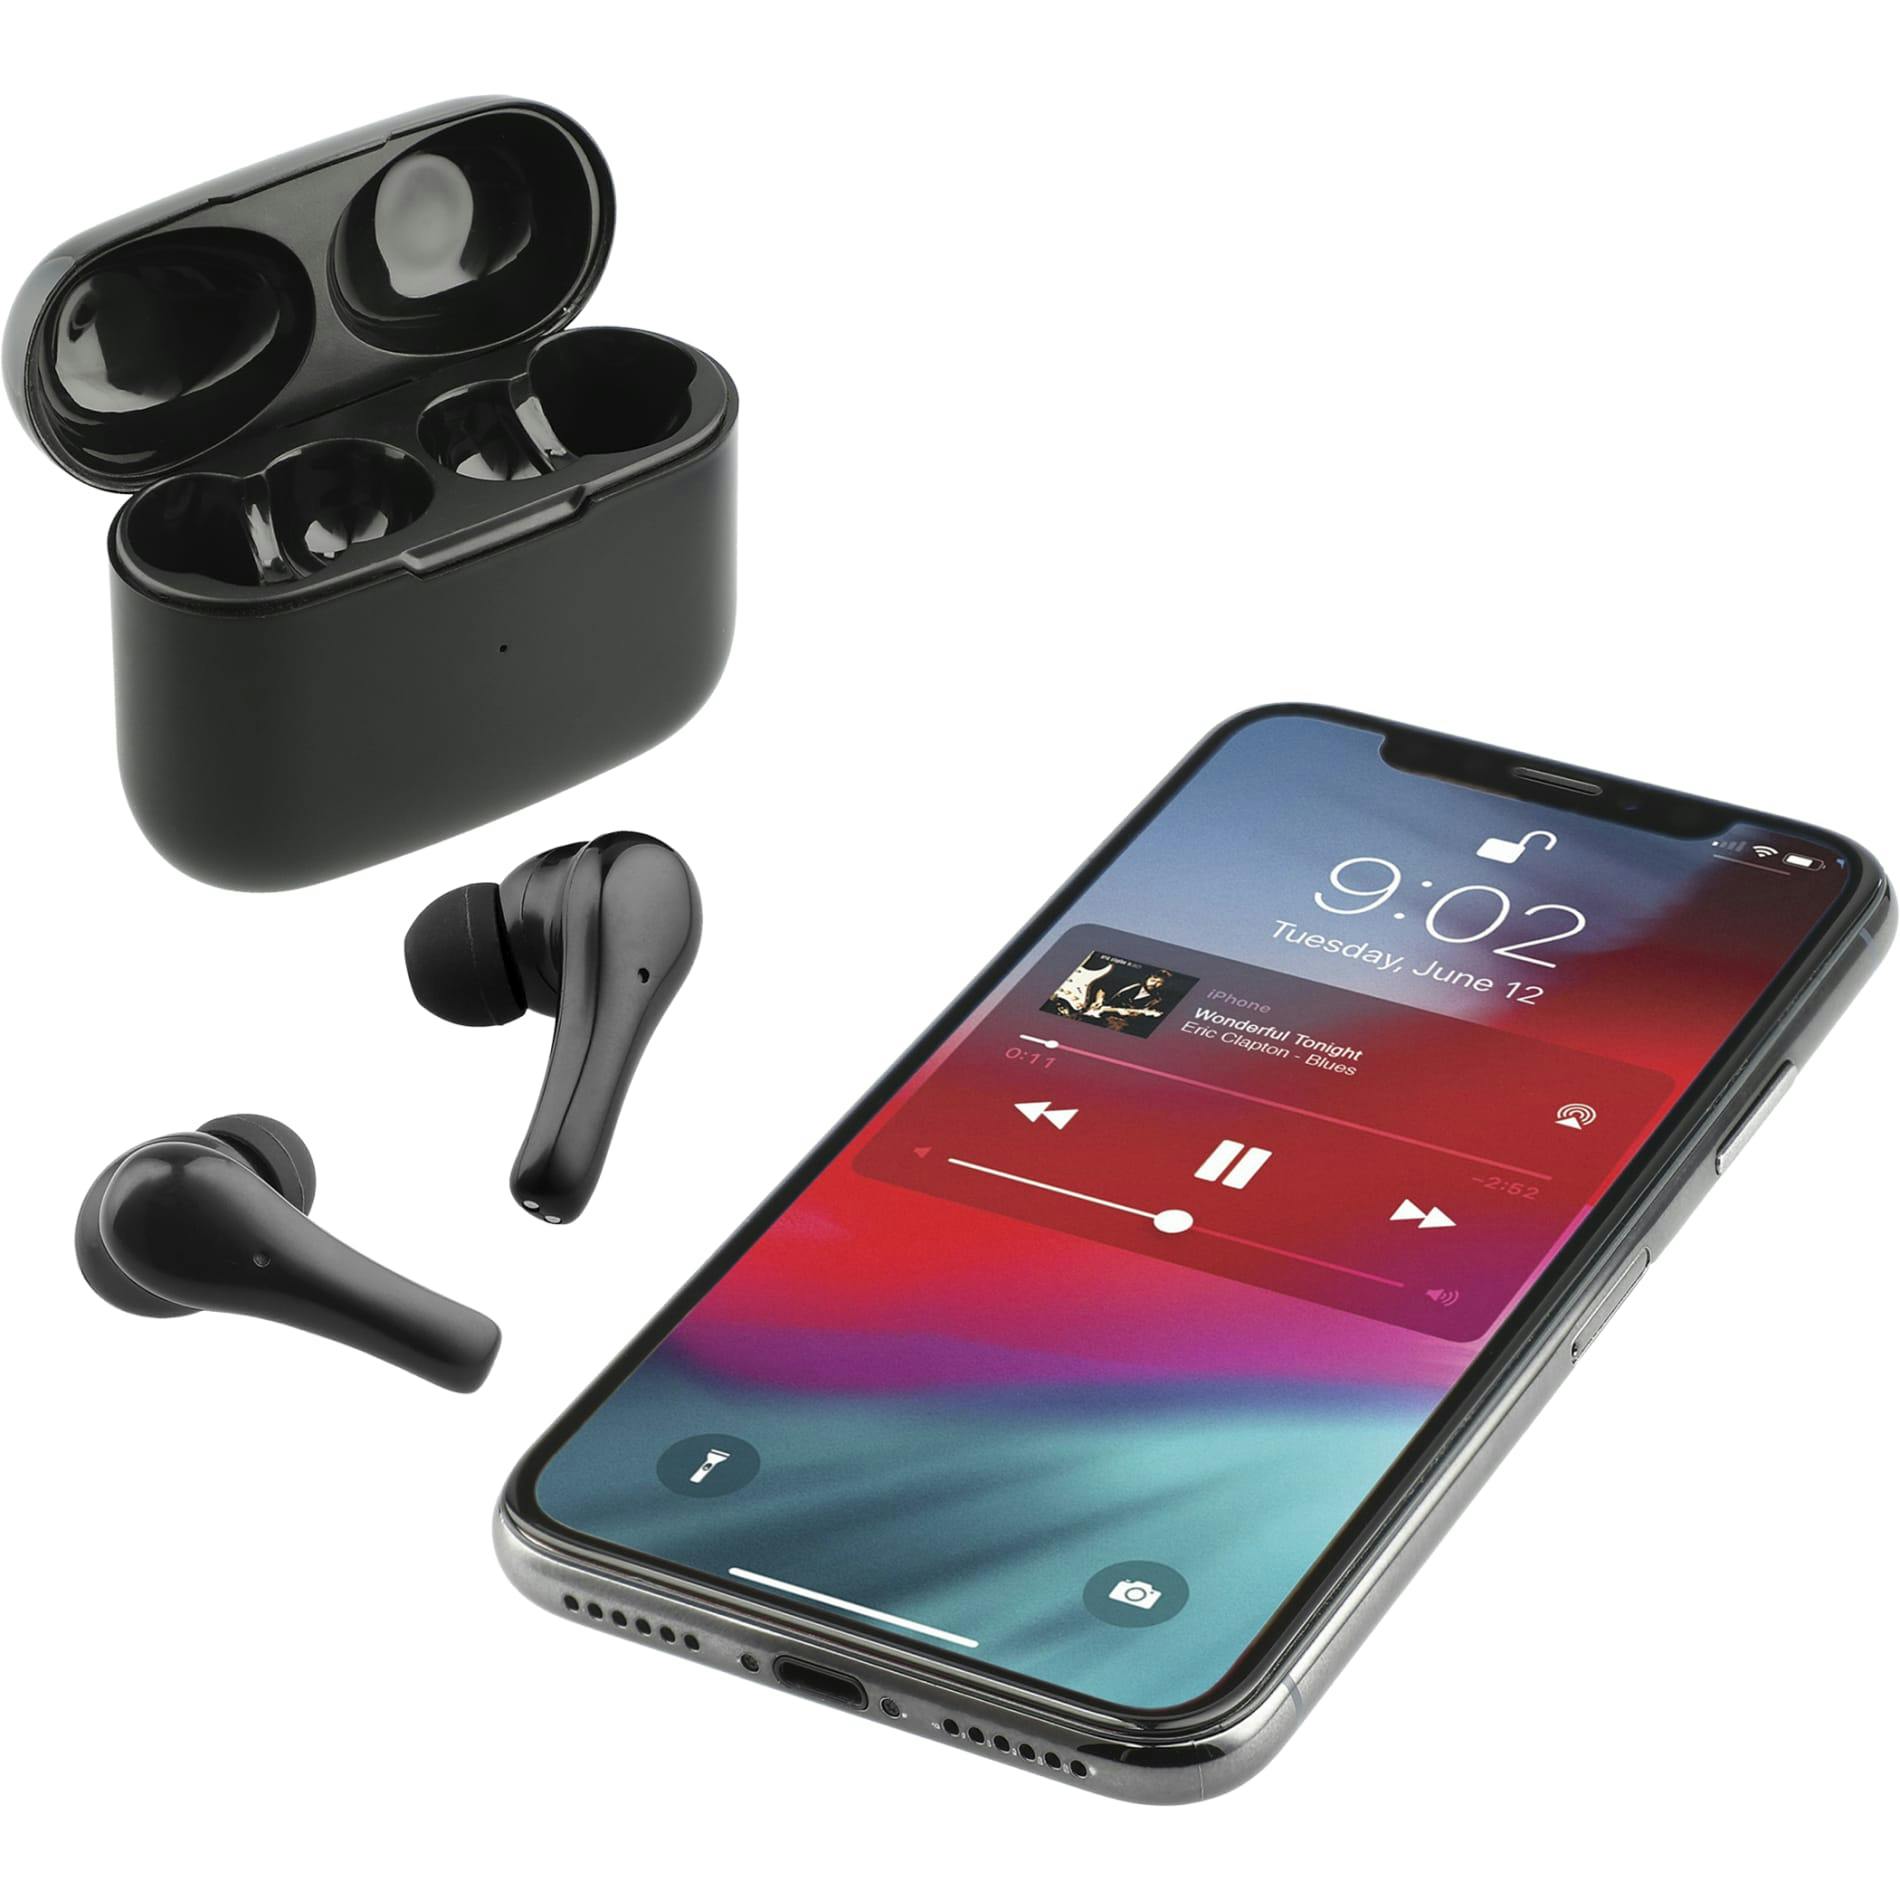 Ifidelity Auto Pair True Wireless Earbuds with ANC - additional Image 3